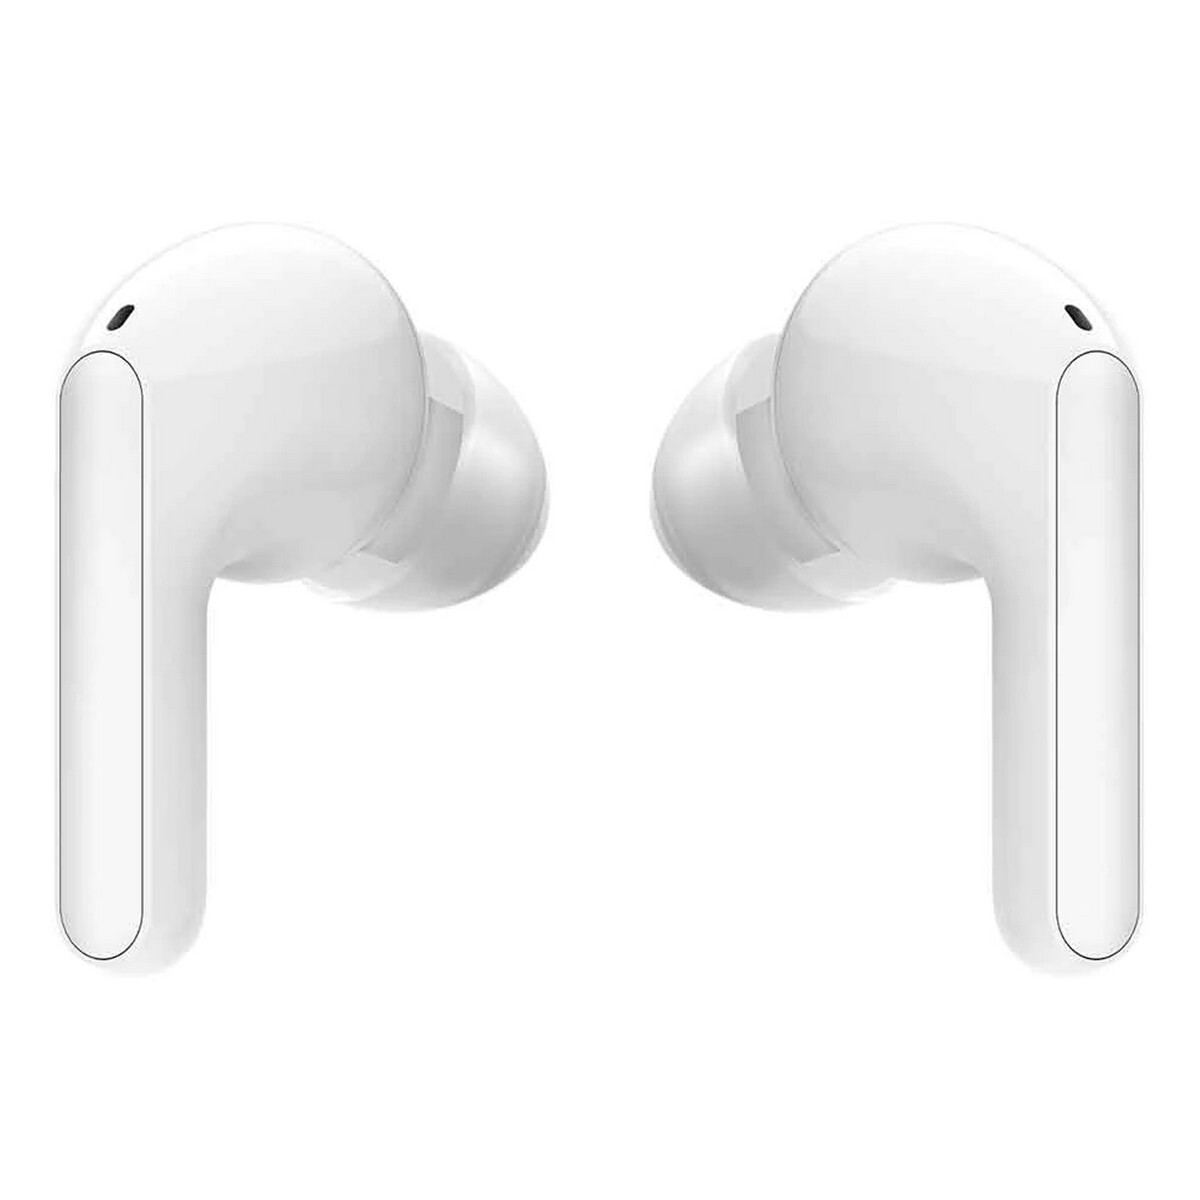 LG FN5U Tone Free Wireless Earbuds with Noise Isolation White